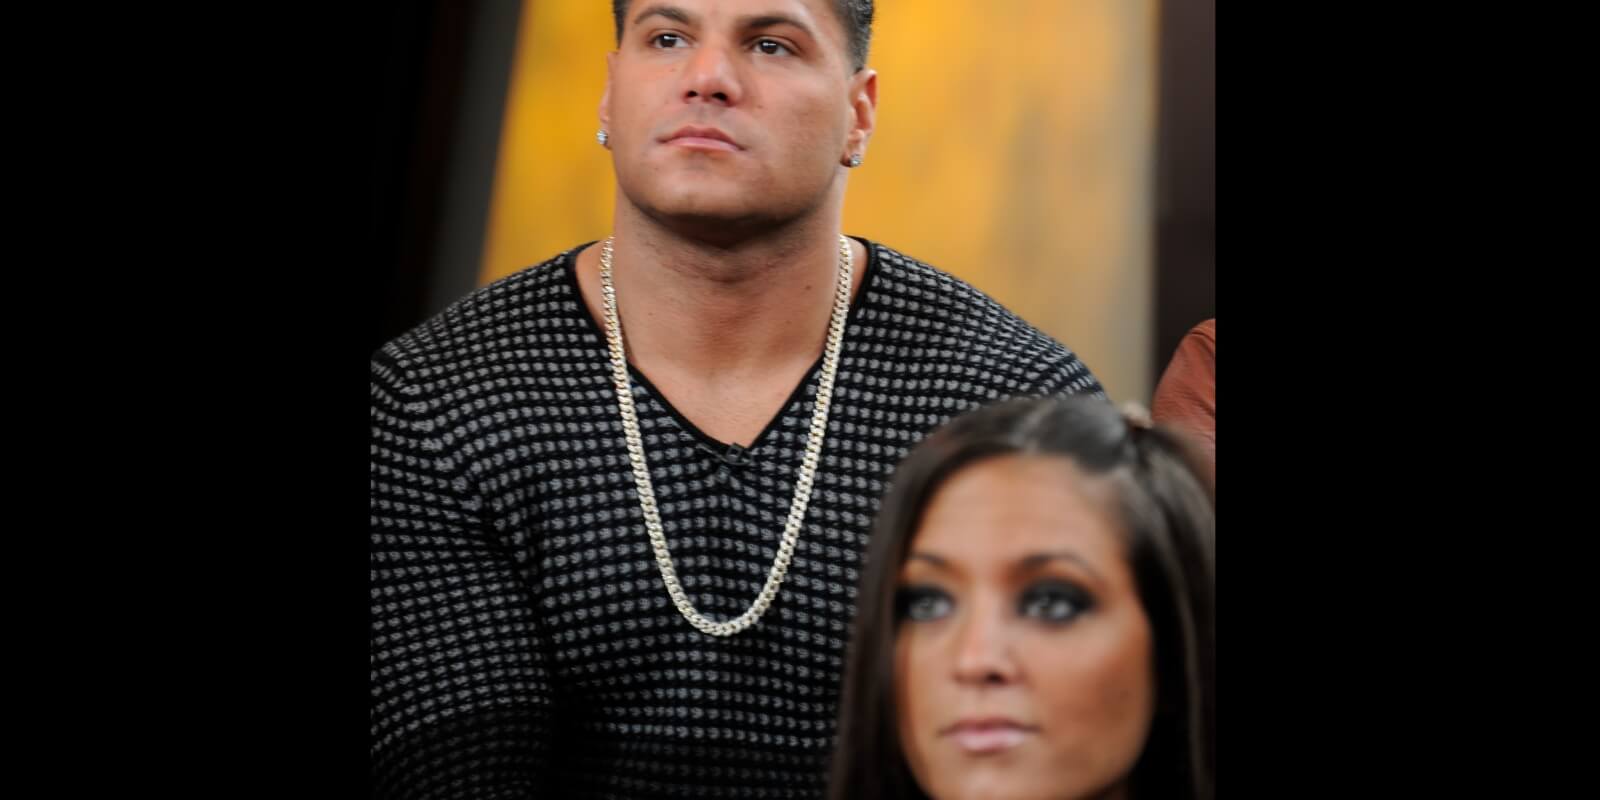 Ronnie Ortiz-Magro and Sammi Giancola photographed together in 2012.